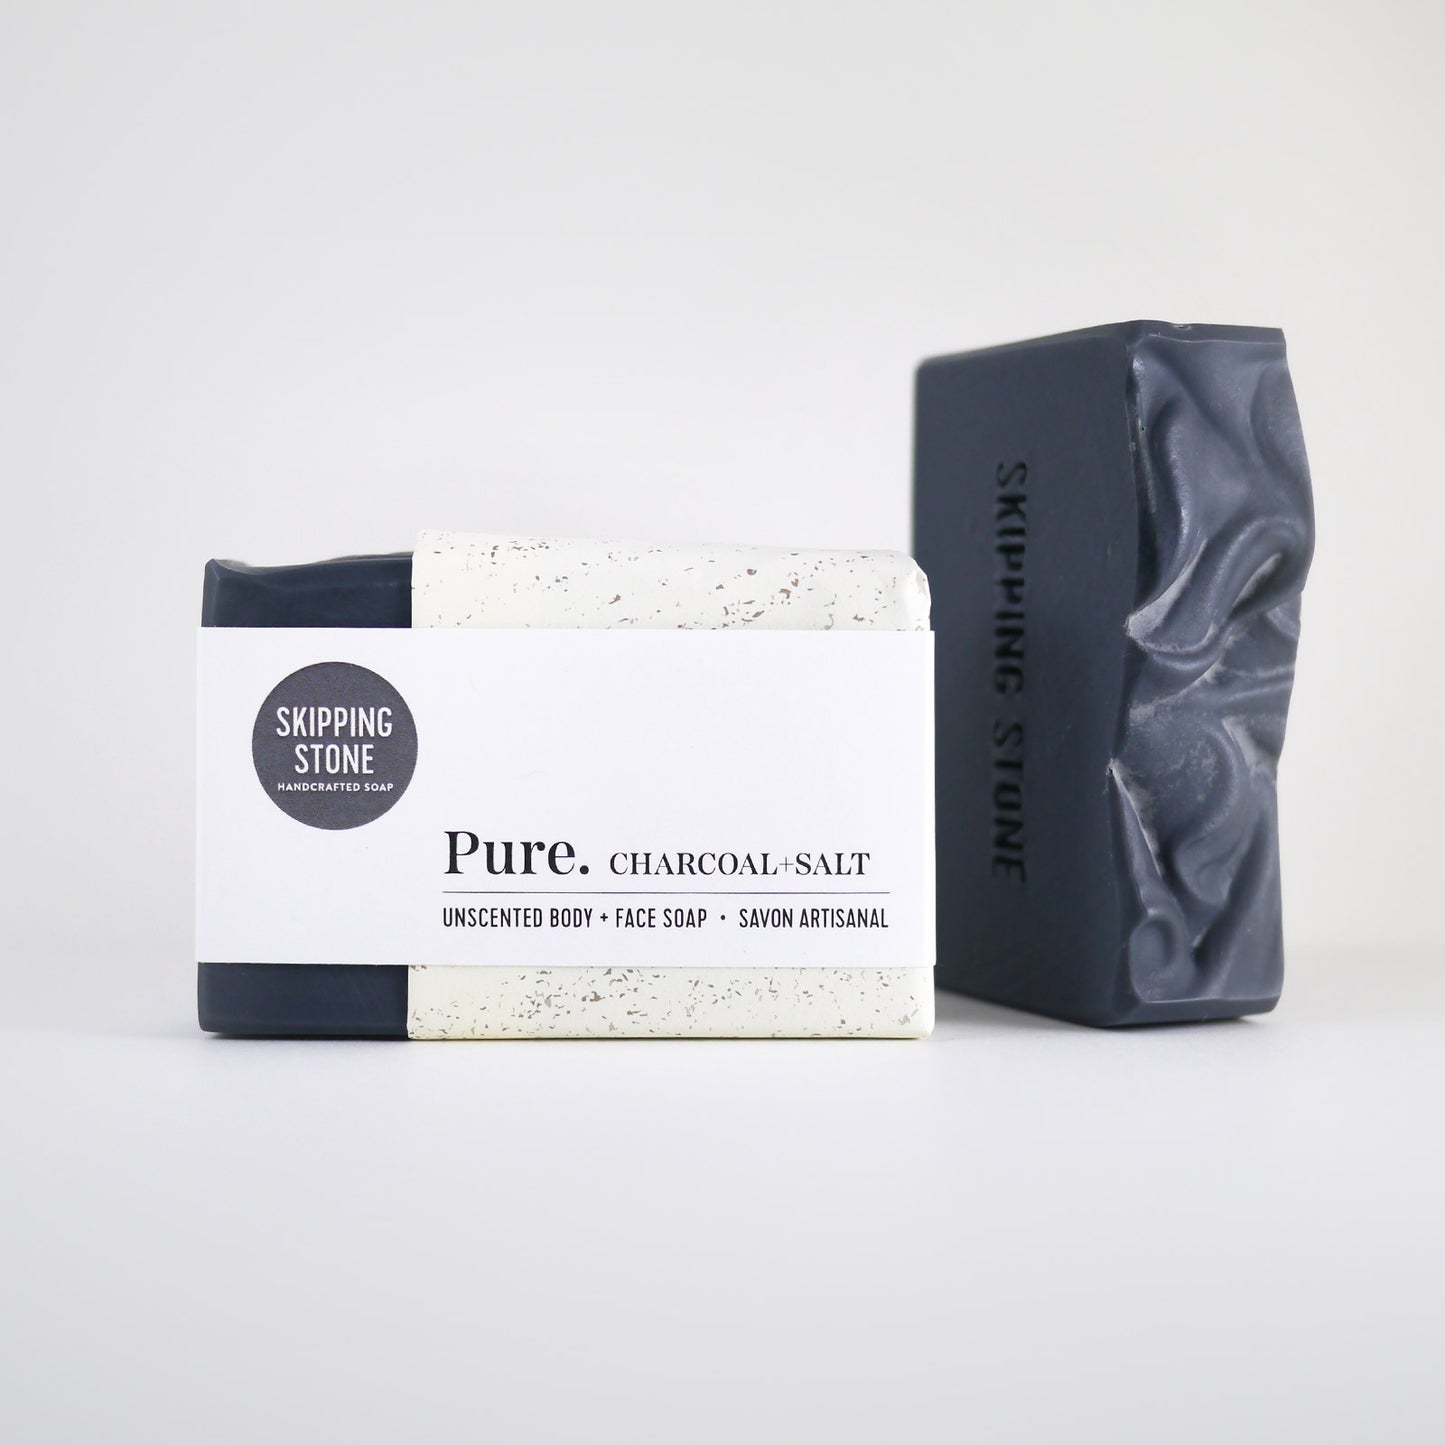 Pure. Charcoal + Salt Body + Face Soap – unscented